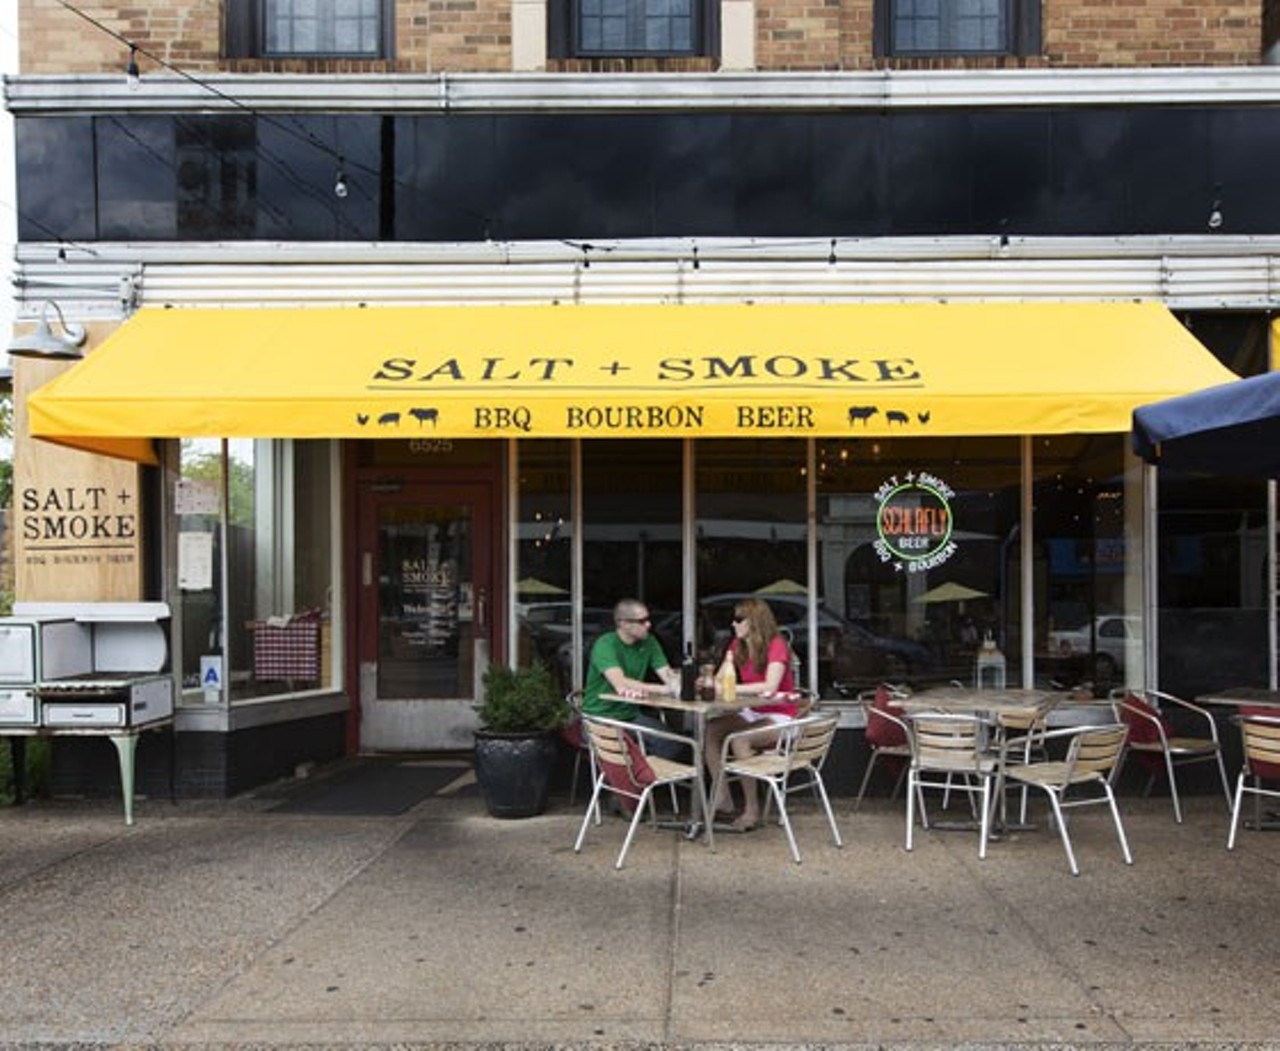 Salt + Smoke
6525 Delmar Blvd.
St. Louis, MO 63130
(314) 727-0200
It&#146;s difficult to walk through the Loop and not crave barbecue, thanks to the amazing aromas coming from Salt + Smoke. So why fight the urge? Take a seat for some sidewalk dining, complete with Texas-style barbecue, a large bourbon selection, craft beer and a great view of the Loop's street parade. Photo by Jennifer Silverberg.